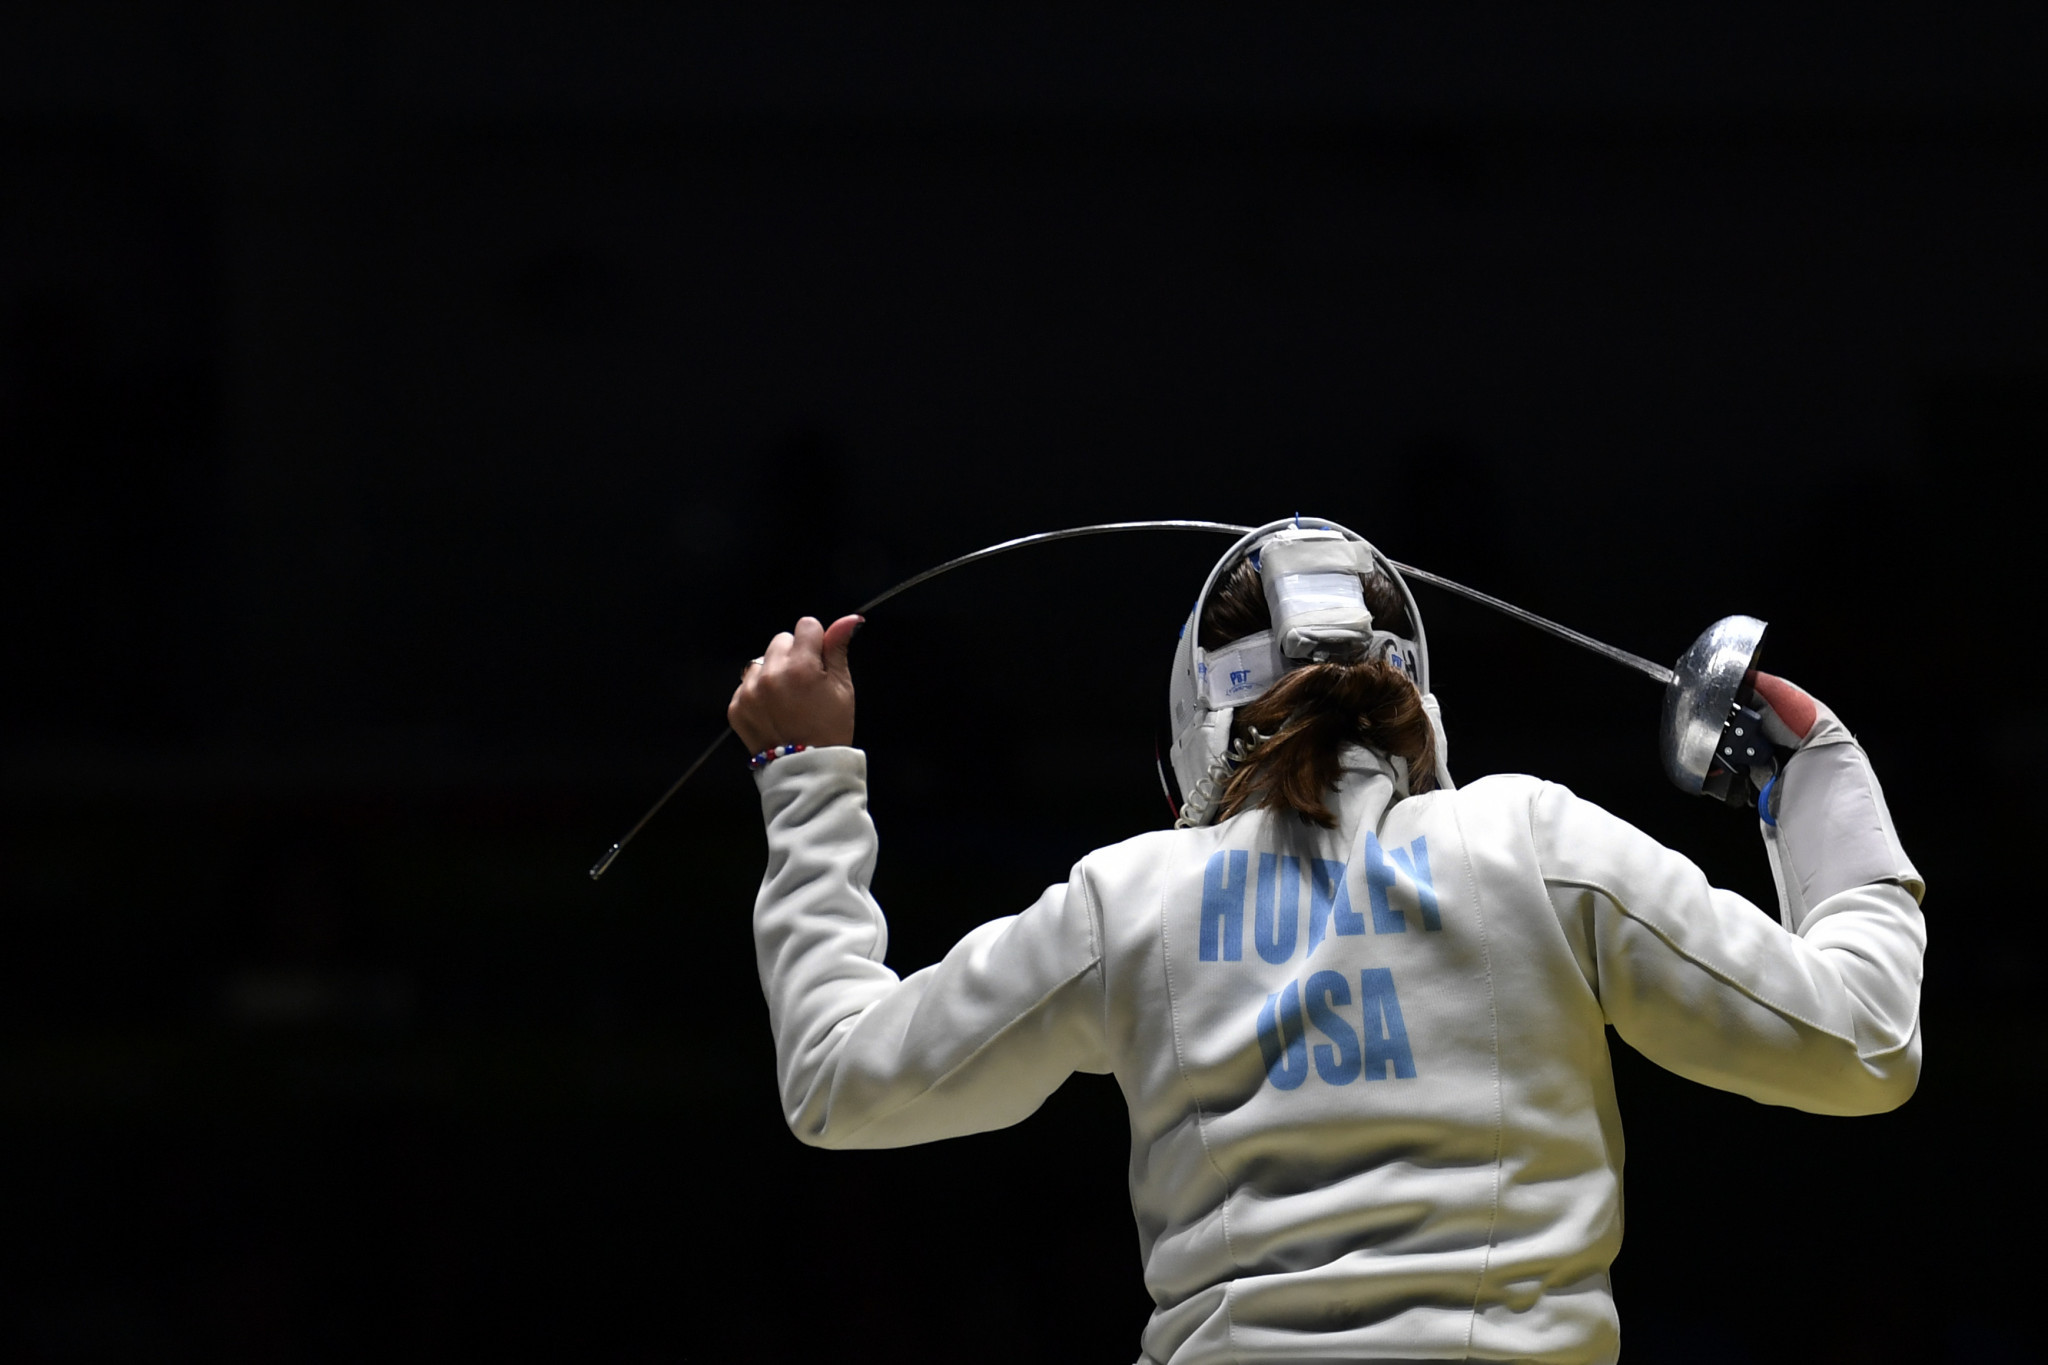 Kelly Hurley retained her women's epee title ©Getty Images